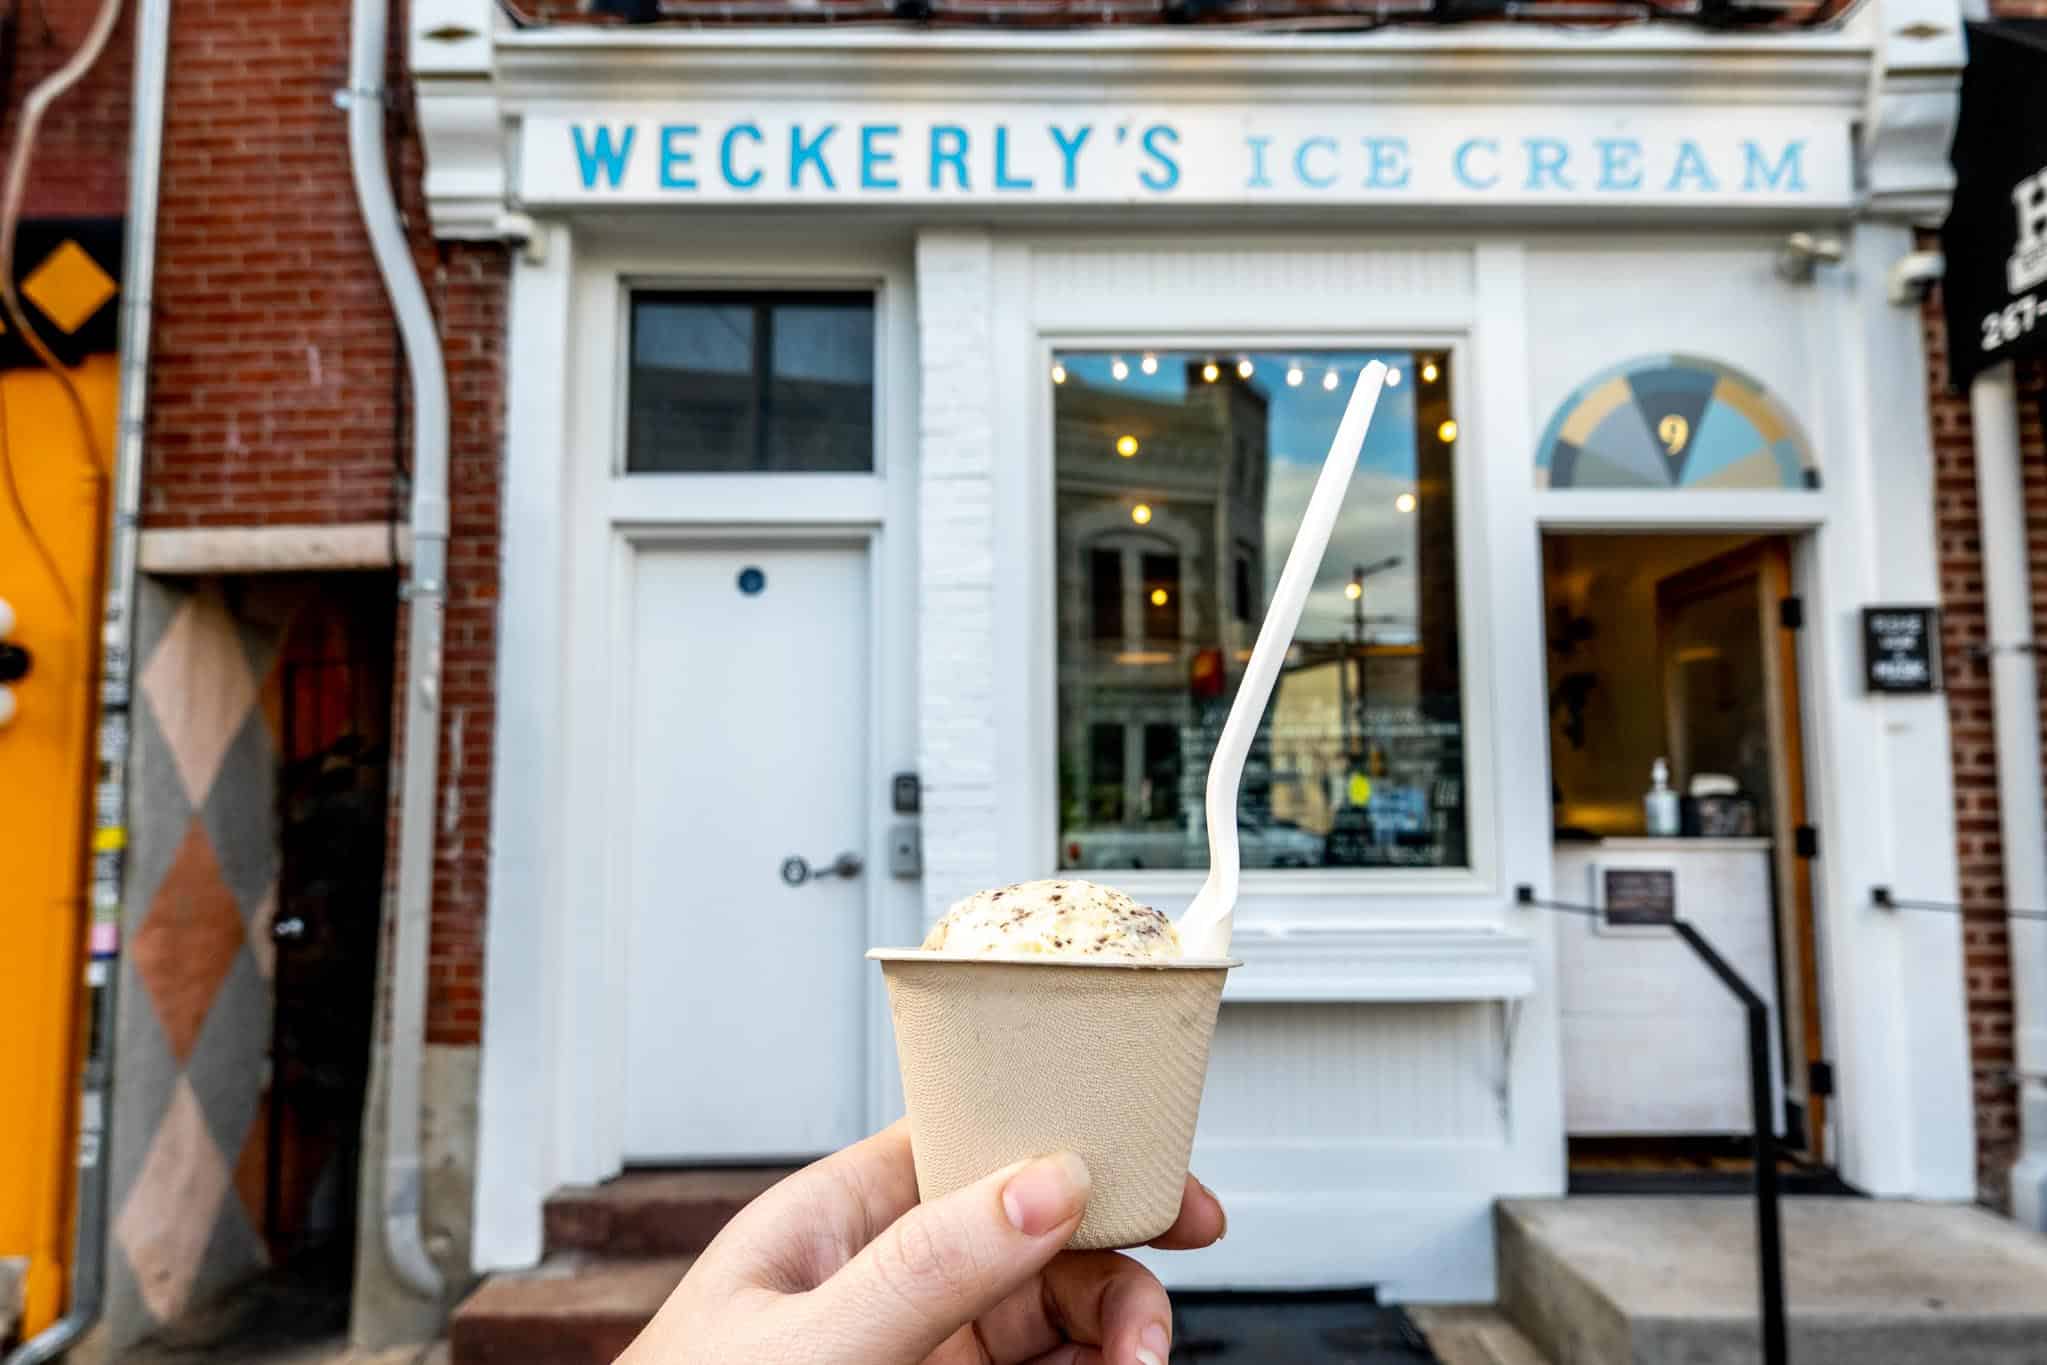 Cup of ice cream in front of Weckerly's Ice Cream storefront